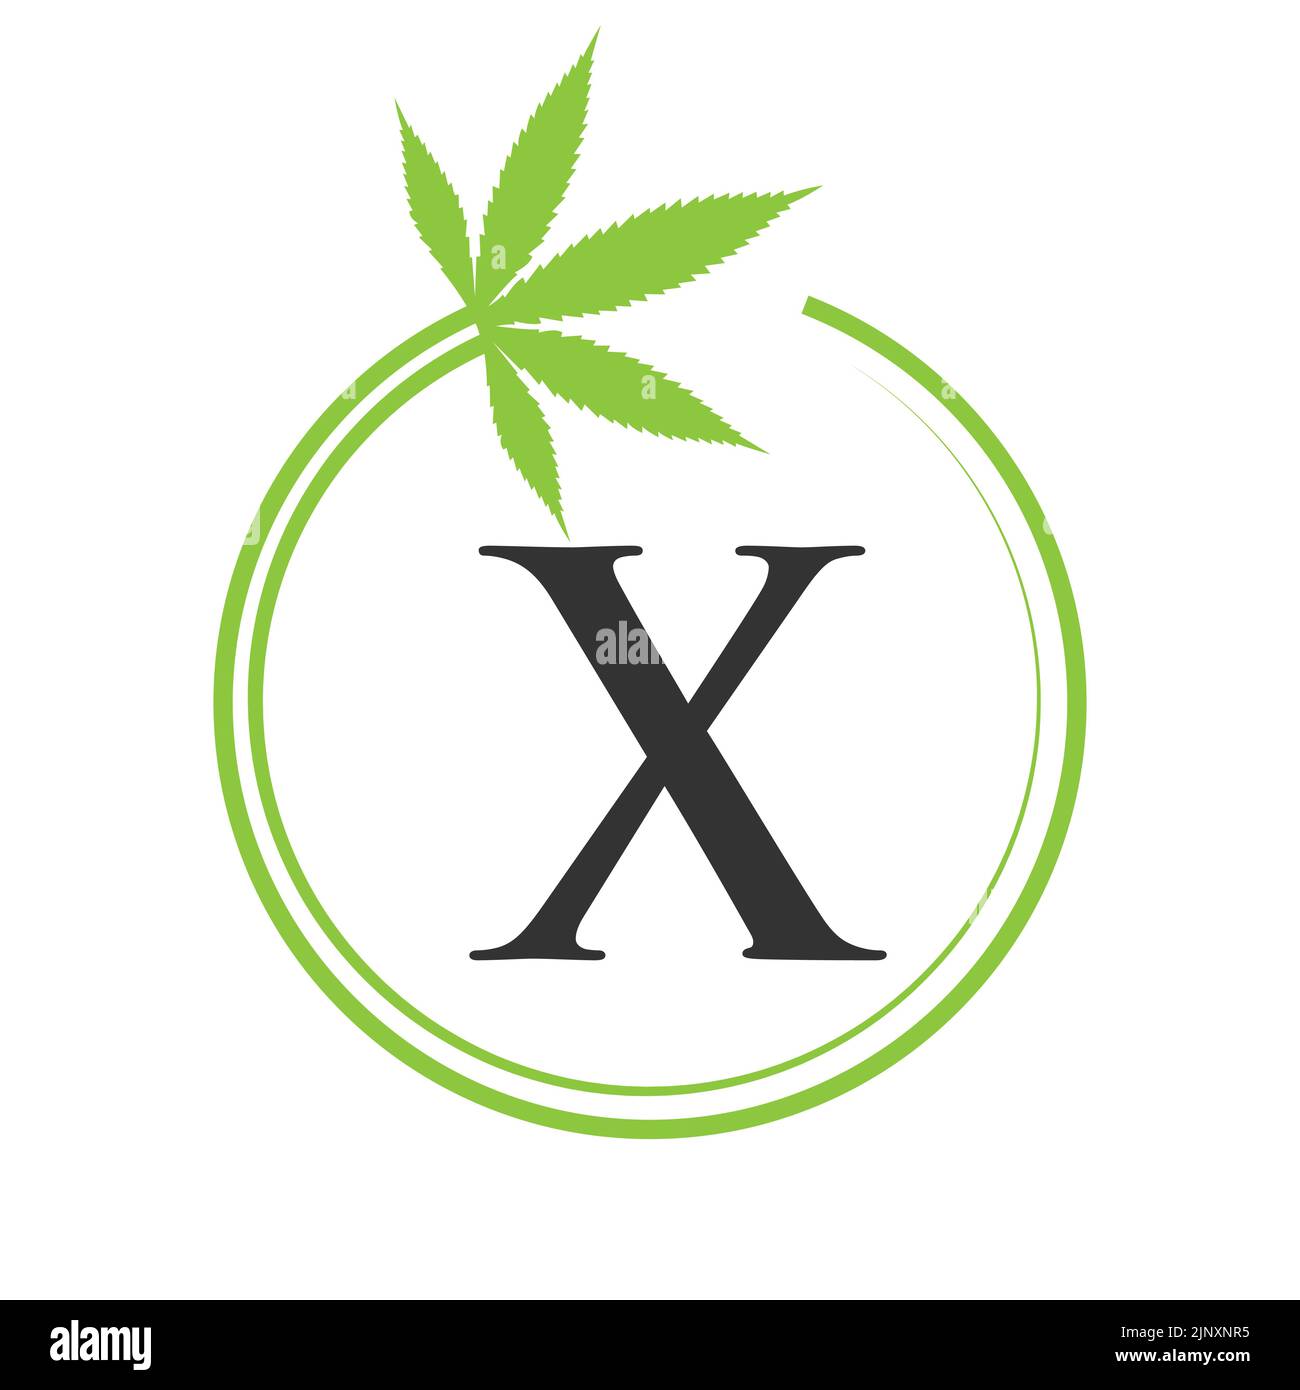 Cannabis Marijuana Logo on Letter X Concept For Health and Medical Therapy. Marijuana, Cannabis Sign Template Stock Vector